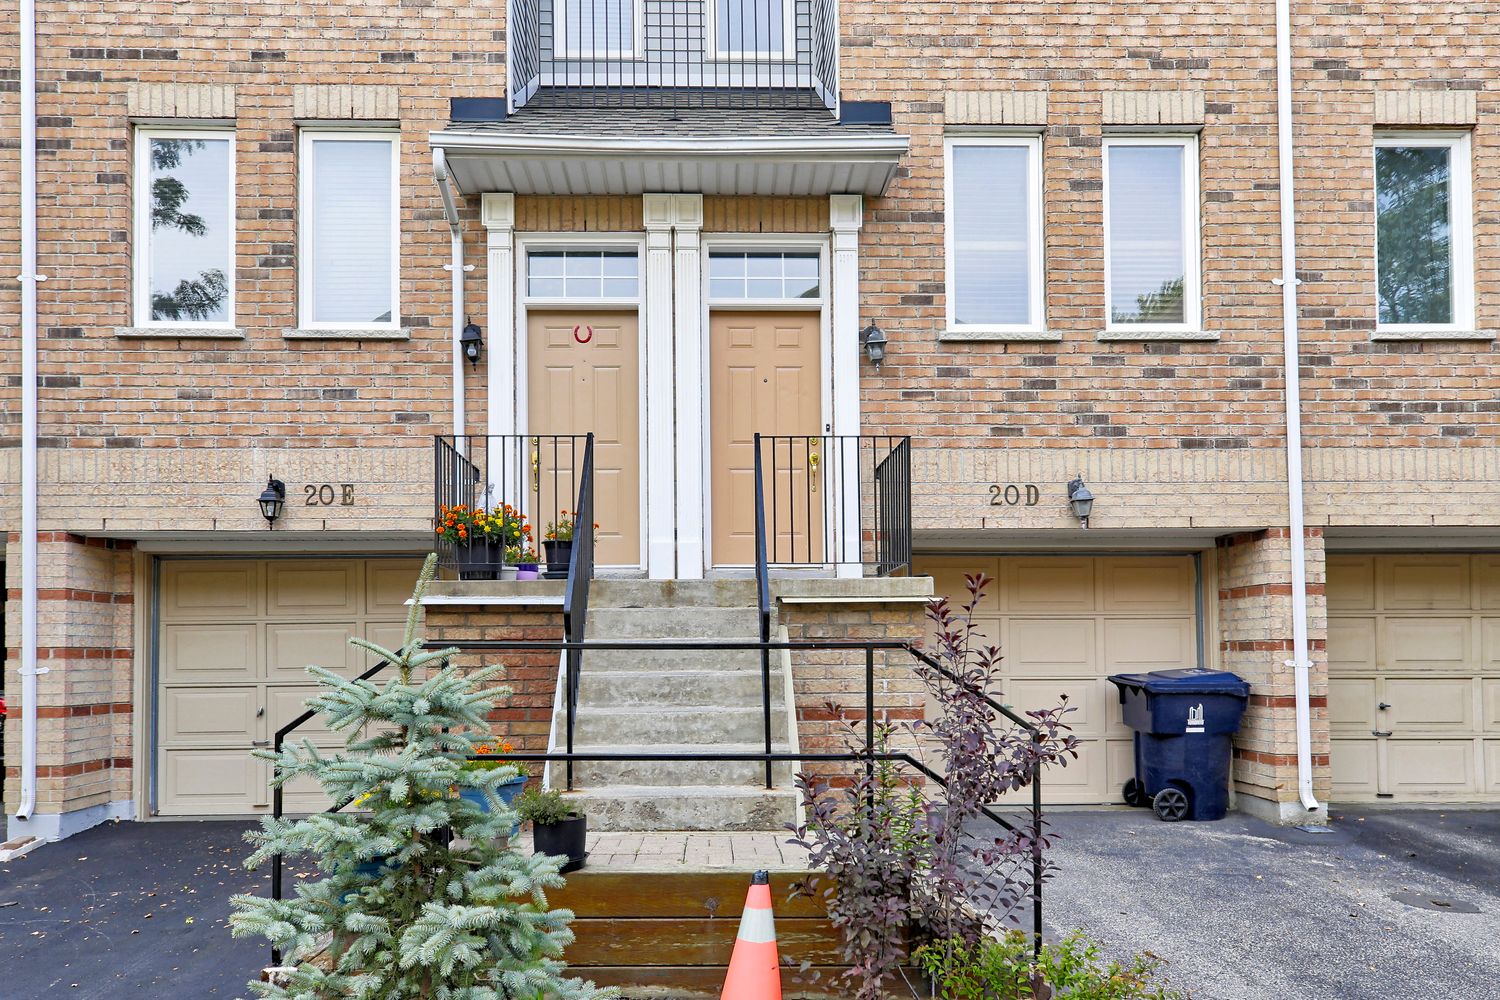 2-22 Leaside Park Drive. Leaside Green Townhomes is located in  East York, Toronto - image #4 of 4